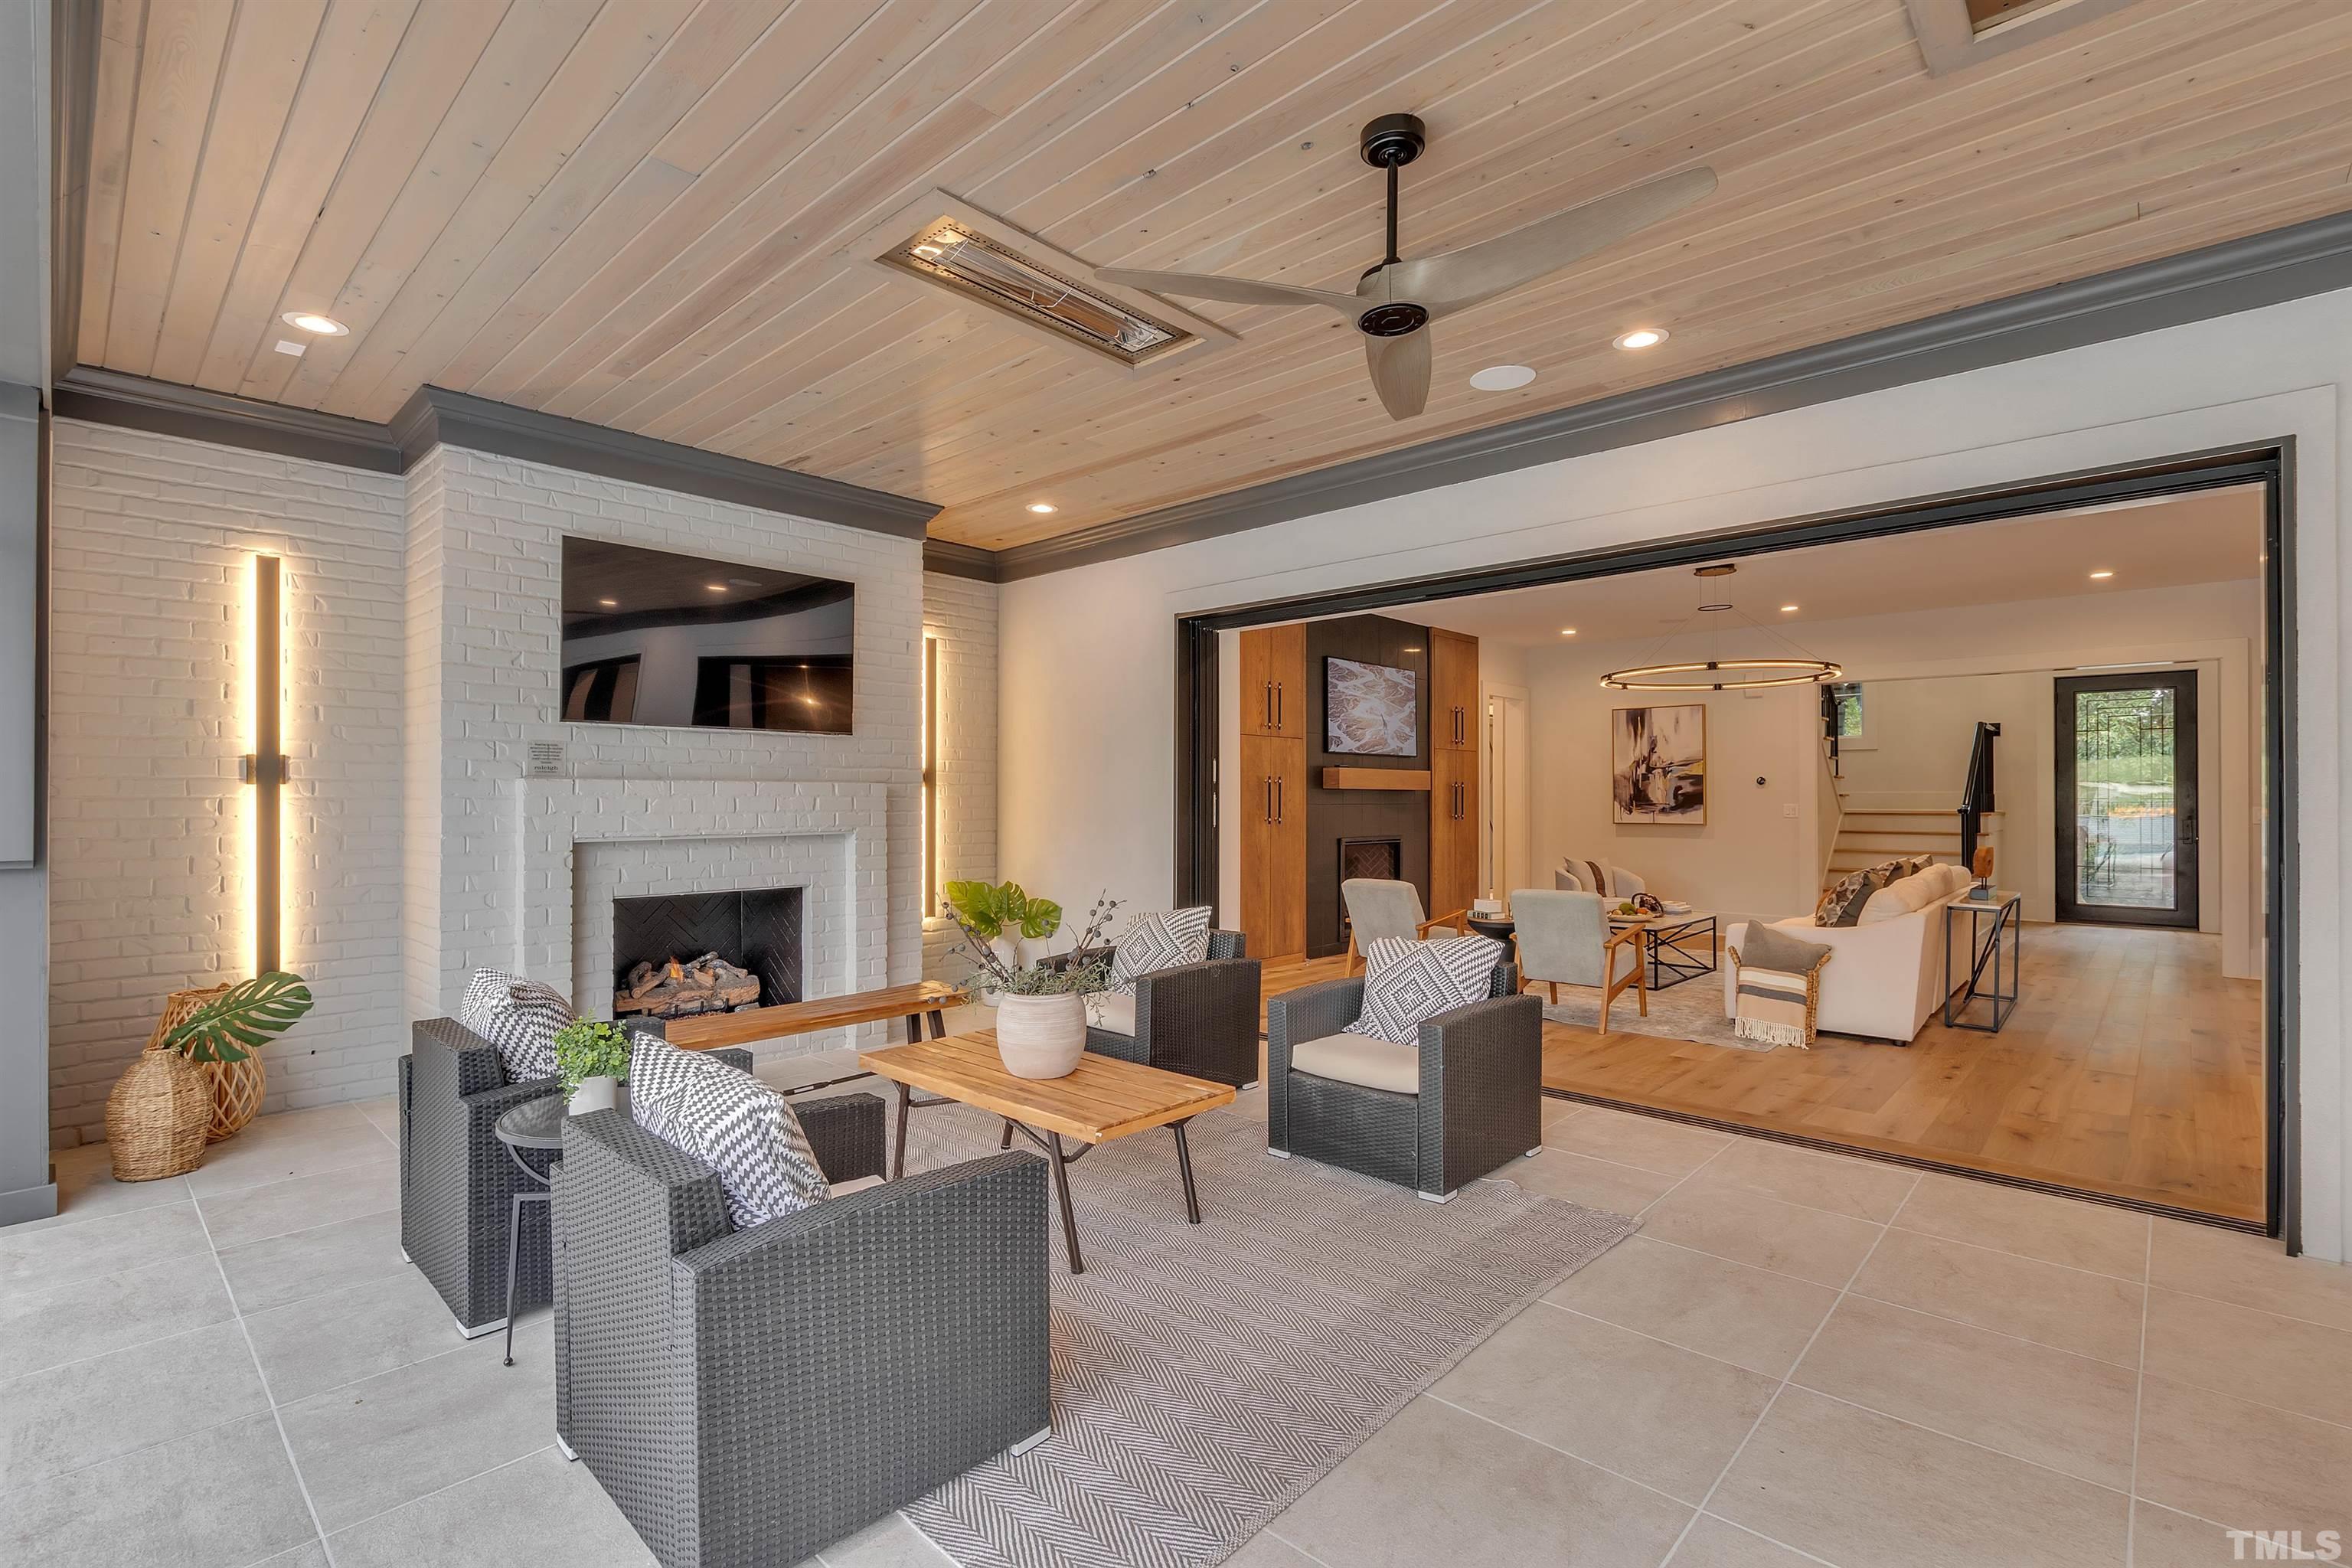 Ceilings Receive Custom Details And Unique Style